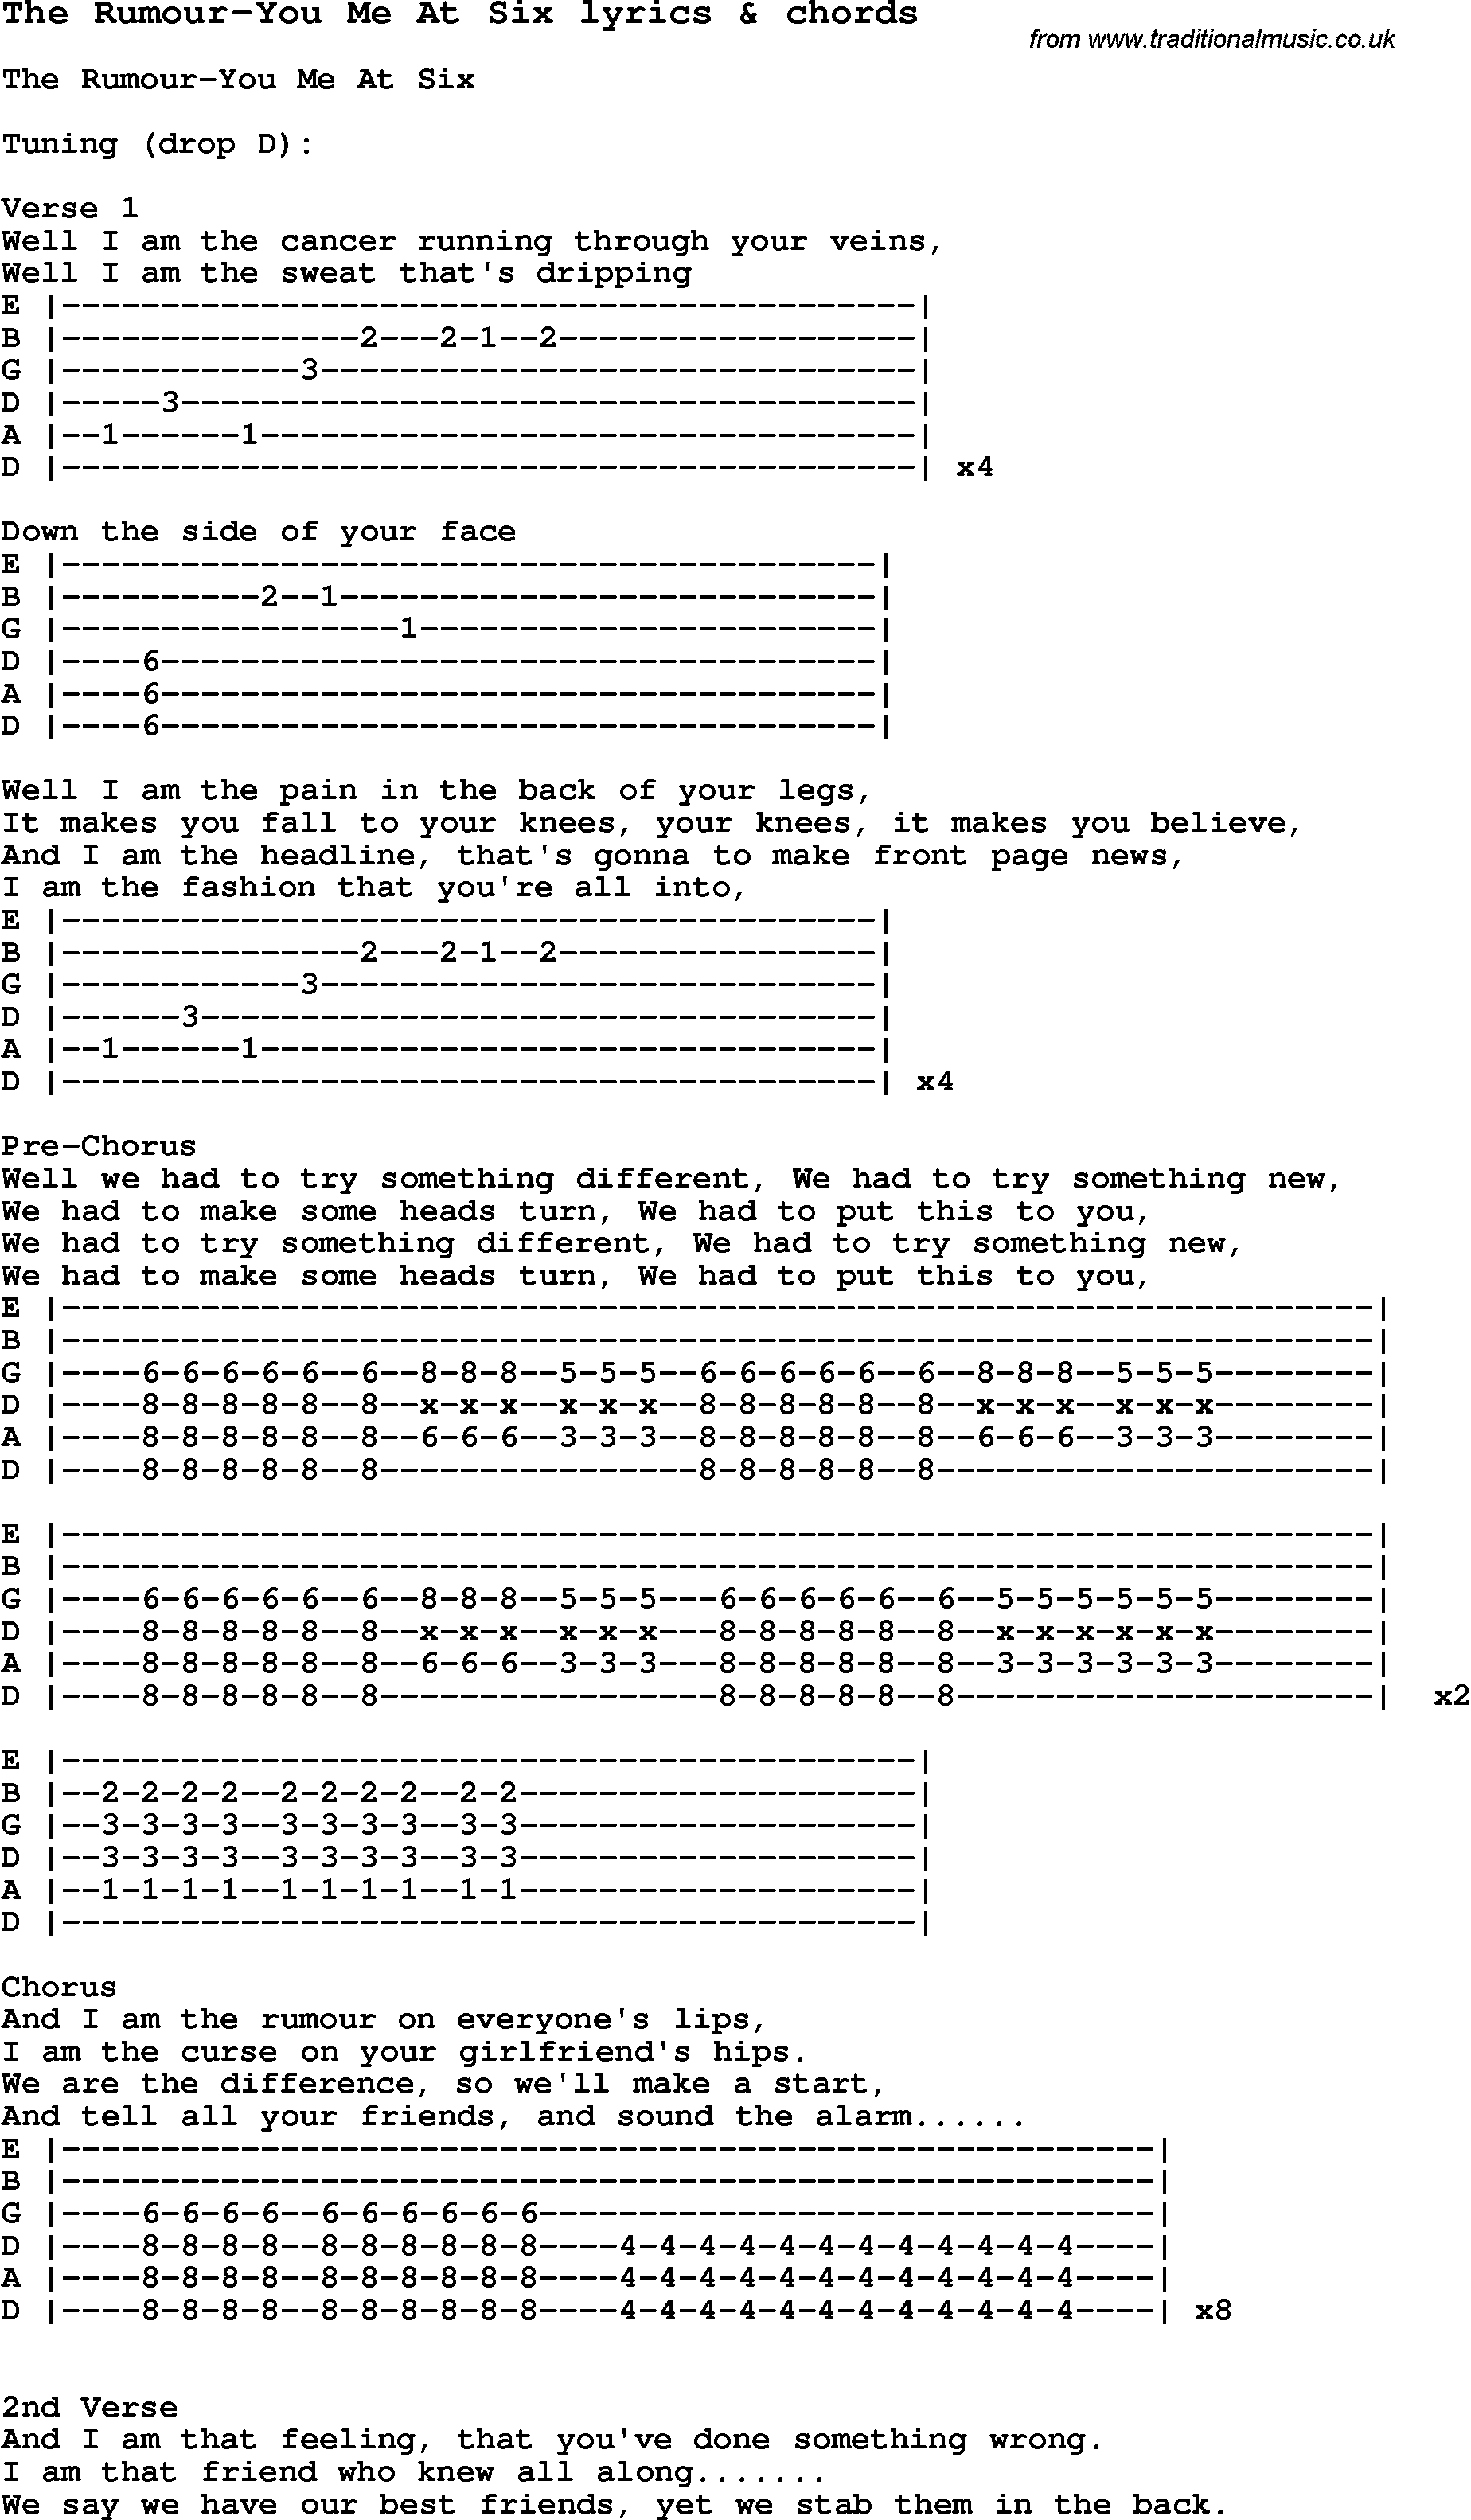 Love Song Lyrics for: The Rumour-You Me At Six with chords for Ukulele, Guitar Banjo etc.